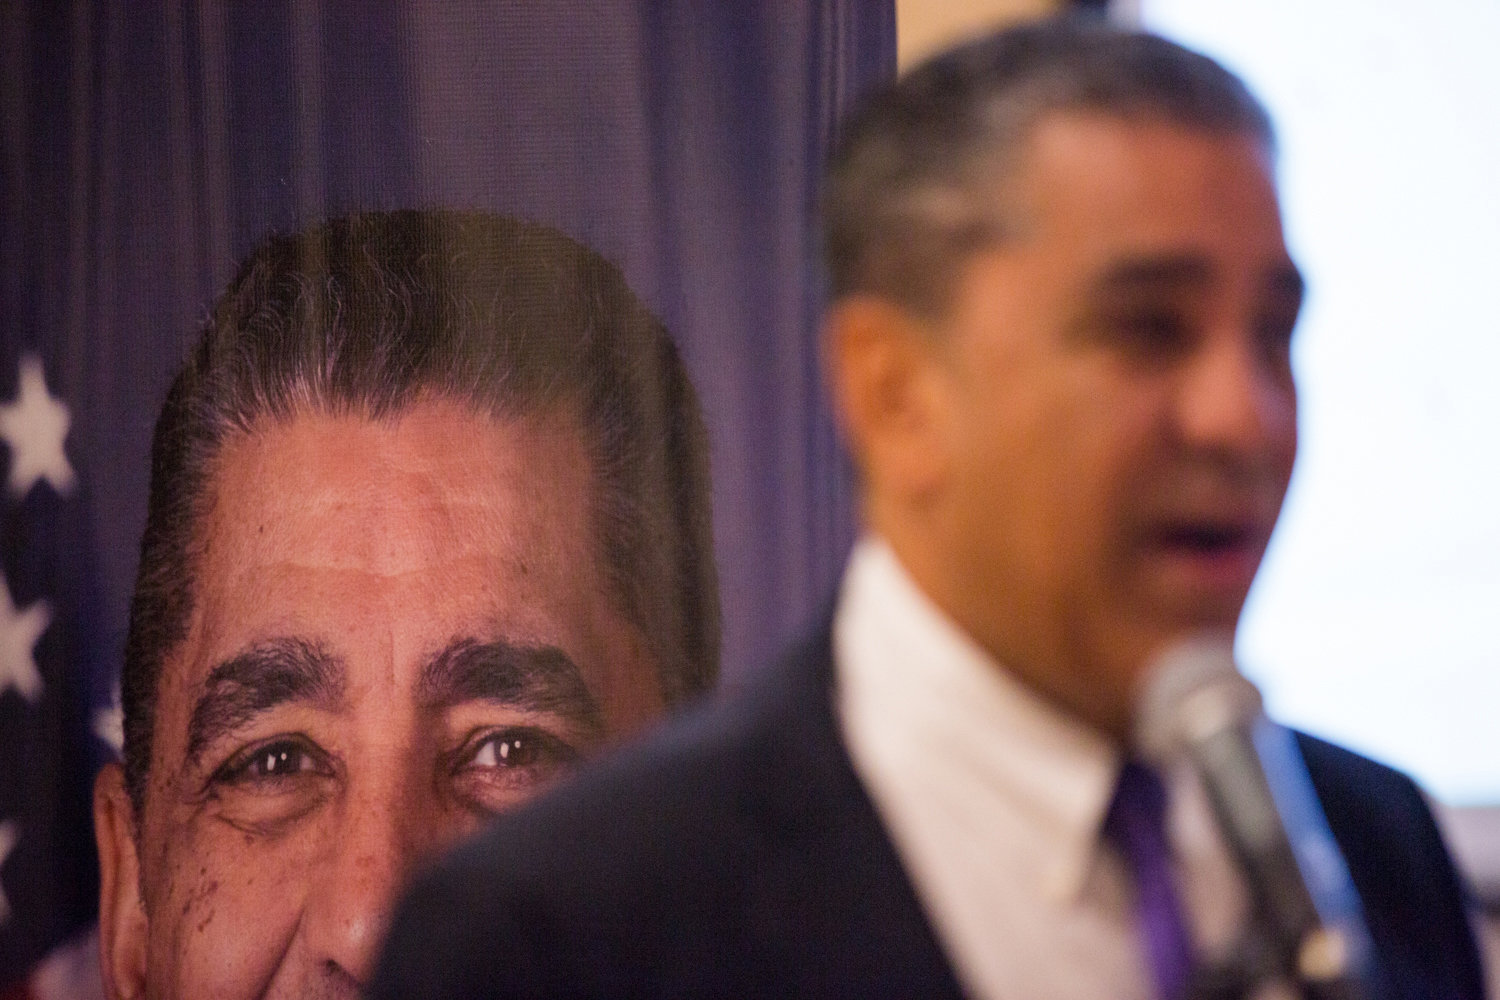 Local congressmen Jamaal Bowman and Adriano Espaillat rode out the Jan. 6 attack on Capitol Hill in their offices. Both voted for the second impeachment of President Donald Trump, and supported further investigation into what even federal prosecutors are calling an insurrection.